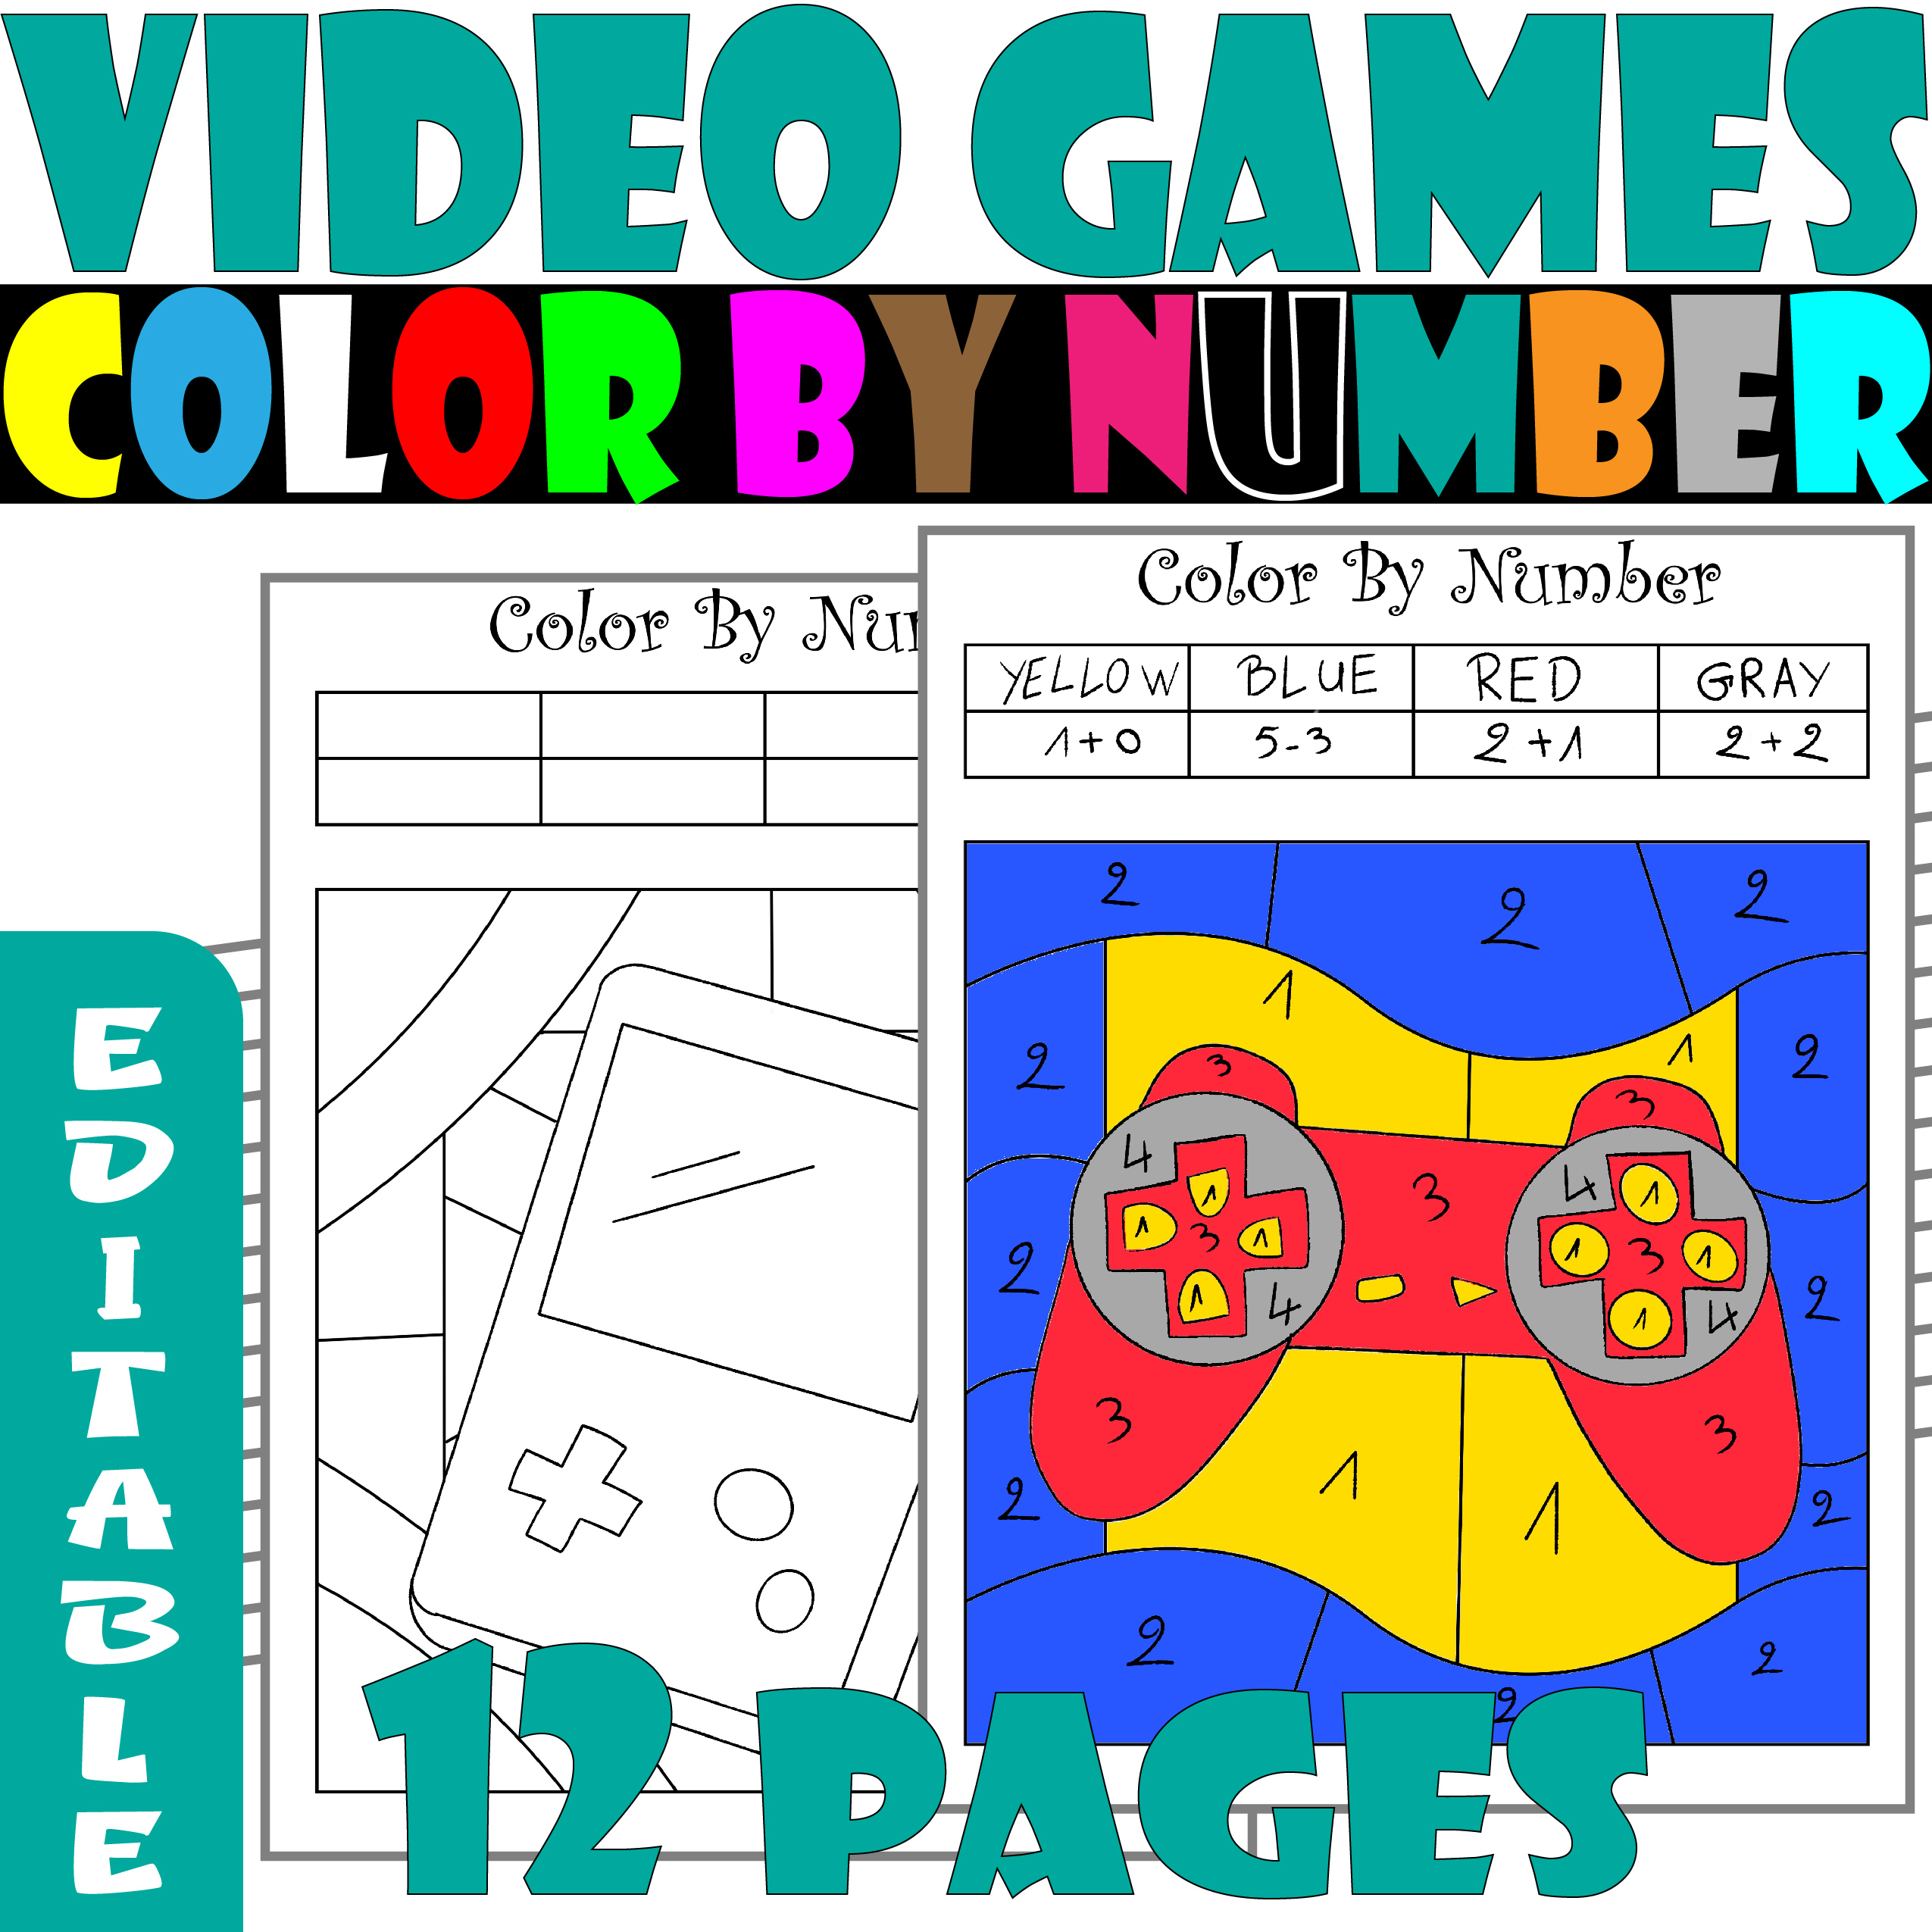 Video games color by number editable video games color by math activities made by teachers